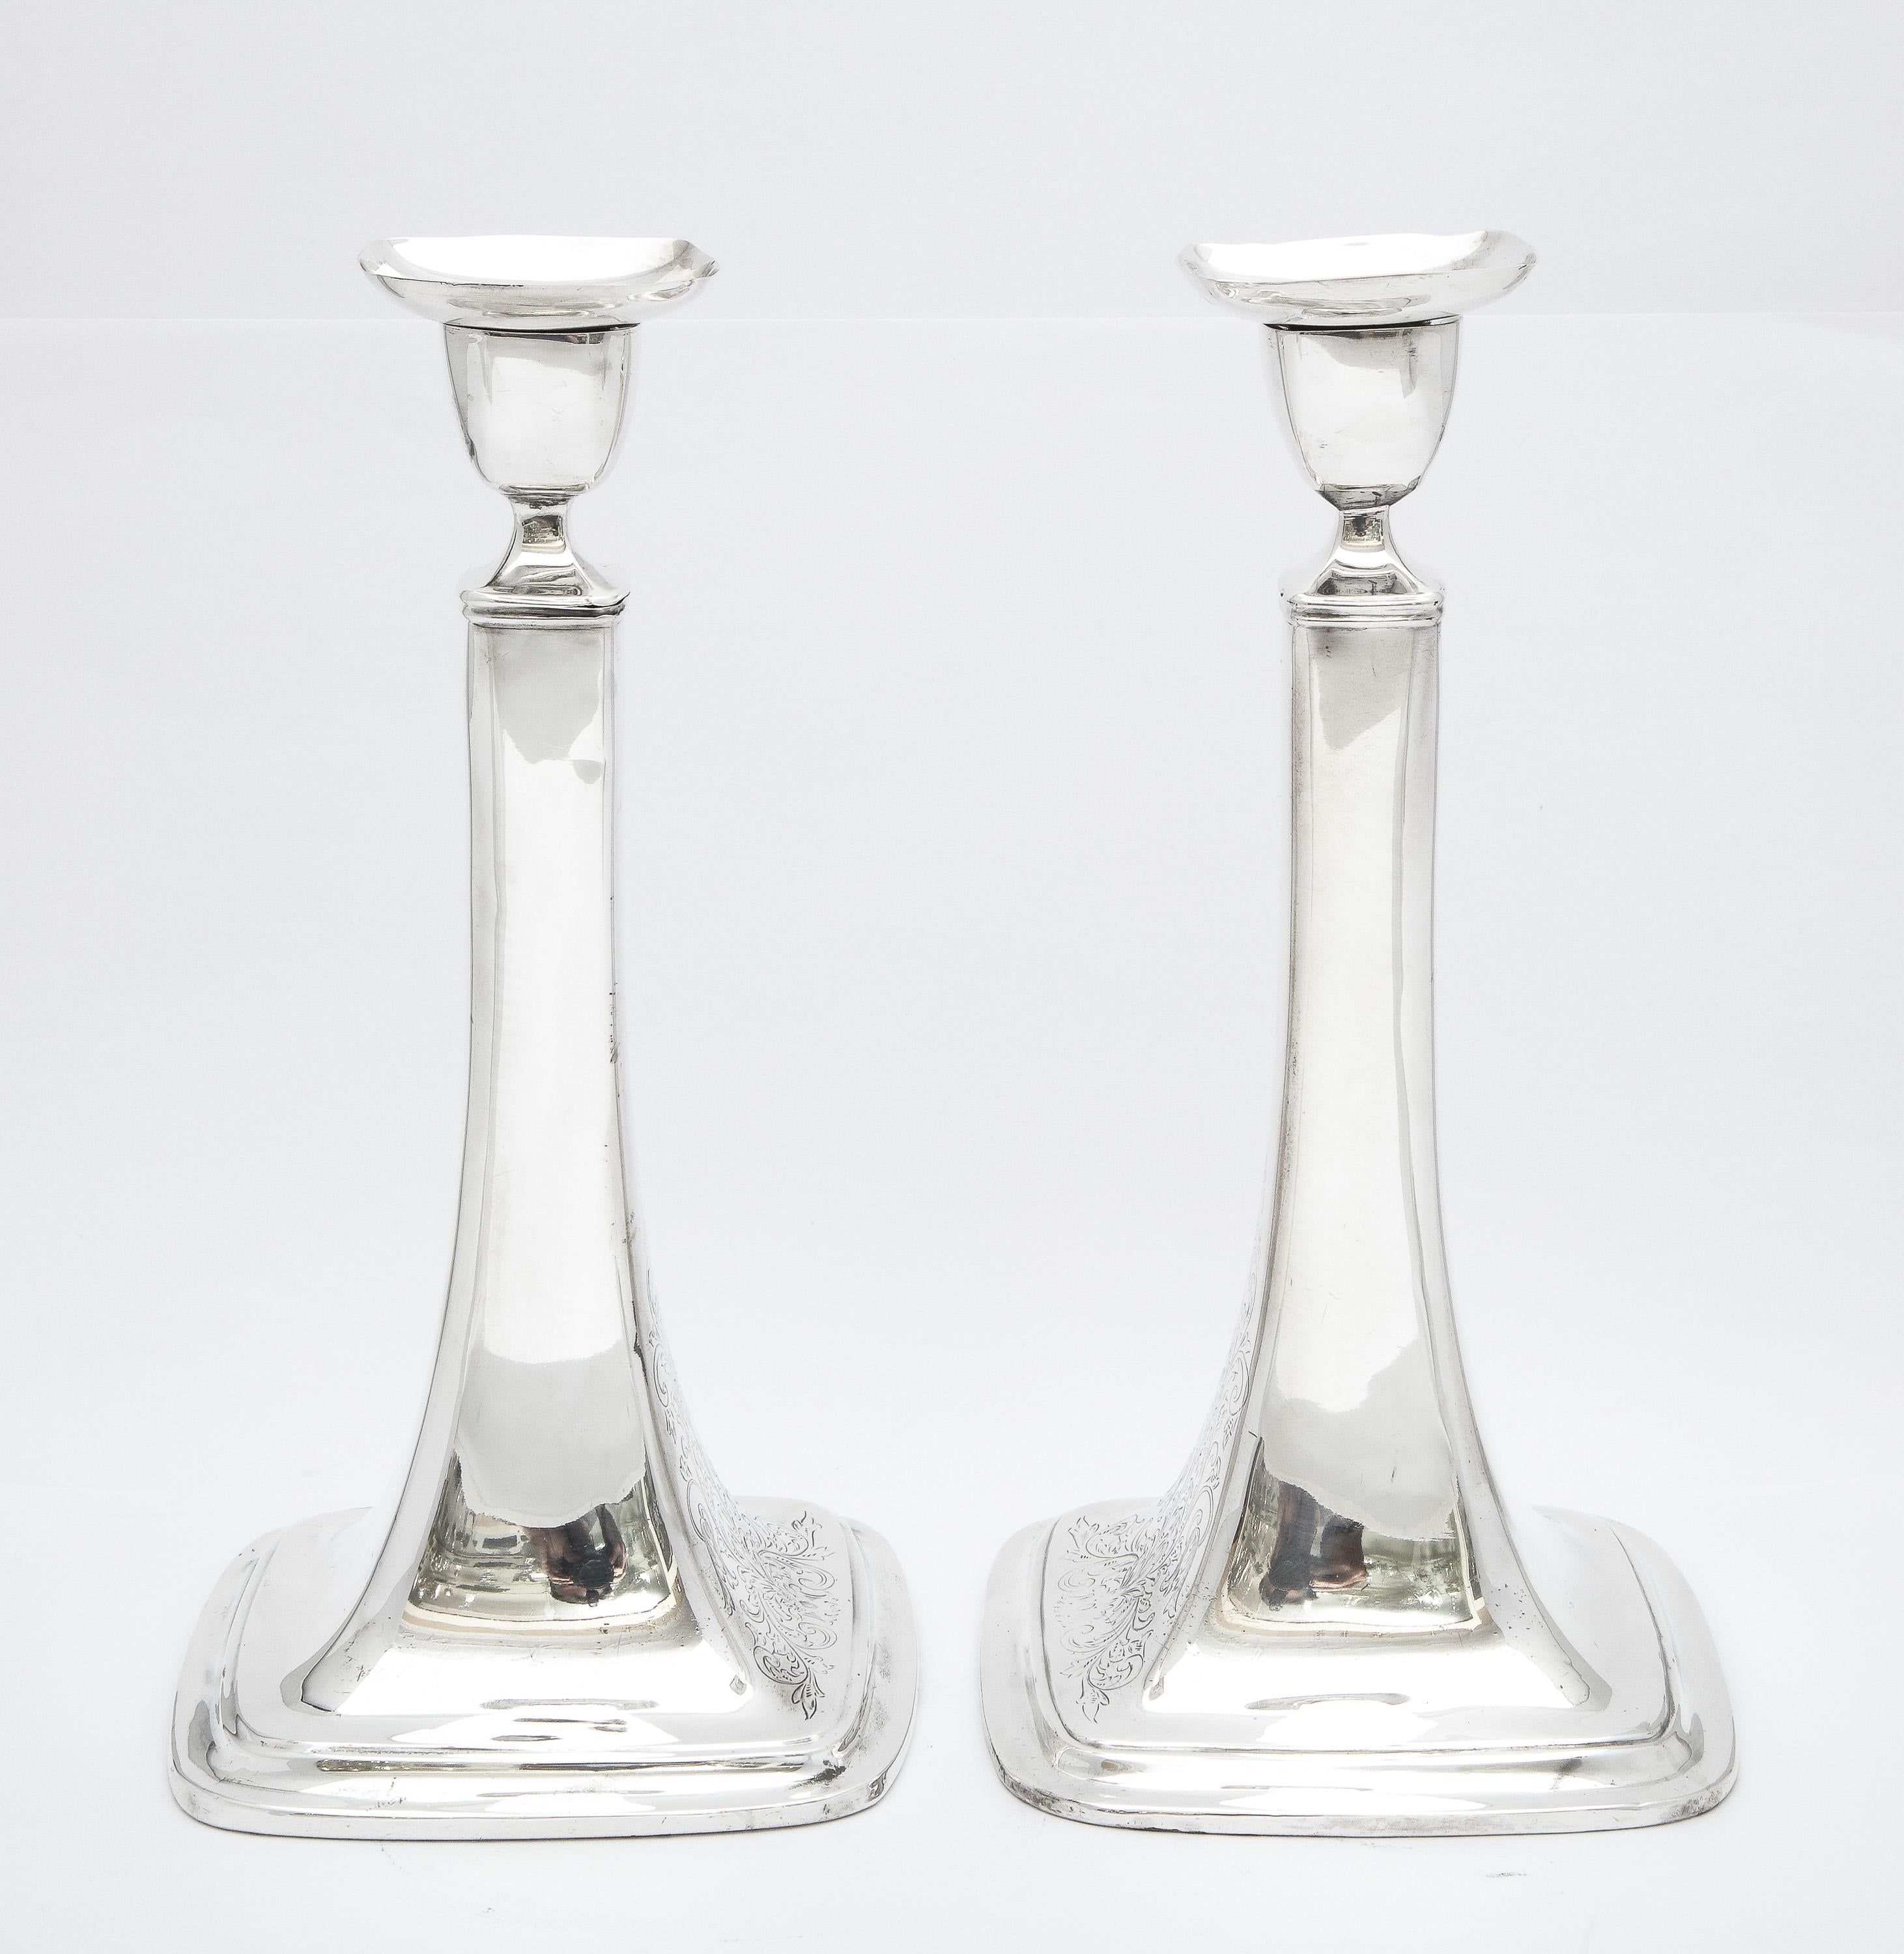 Tall Pair of Edwardian Period Sterling Silver Candlesticks 3